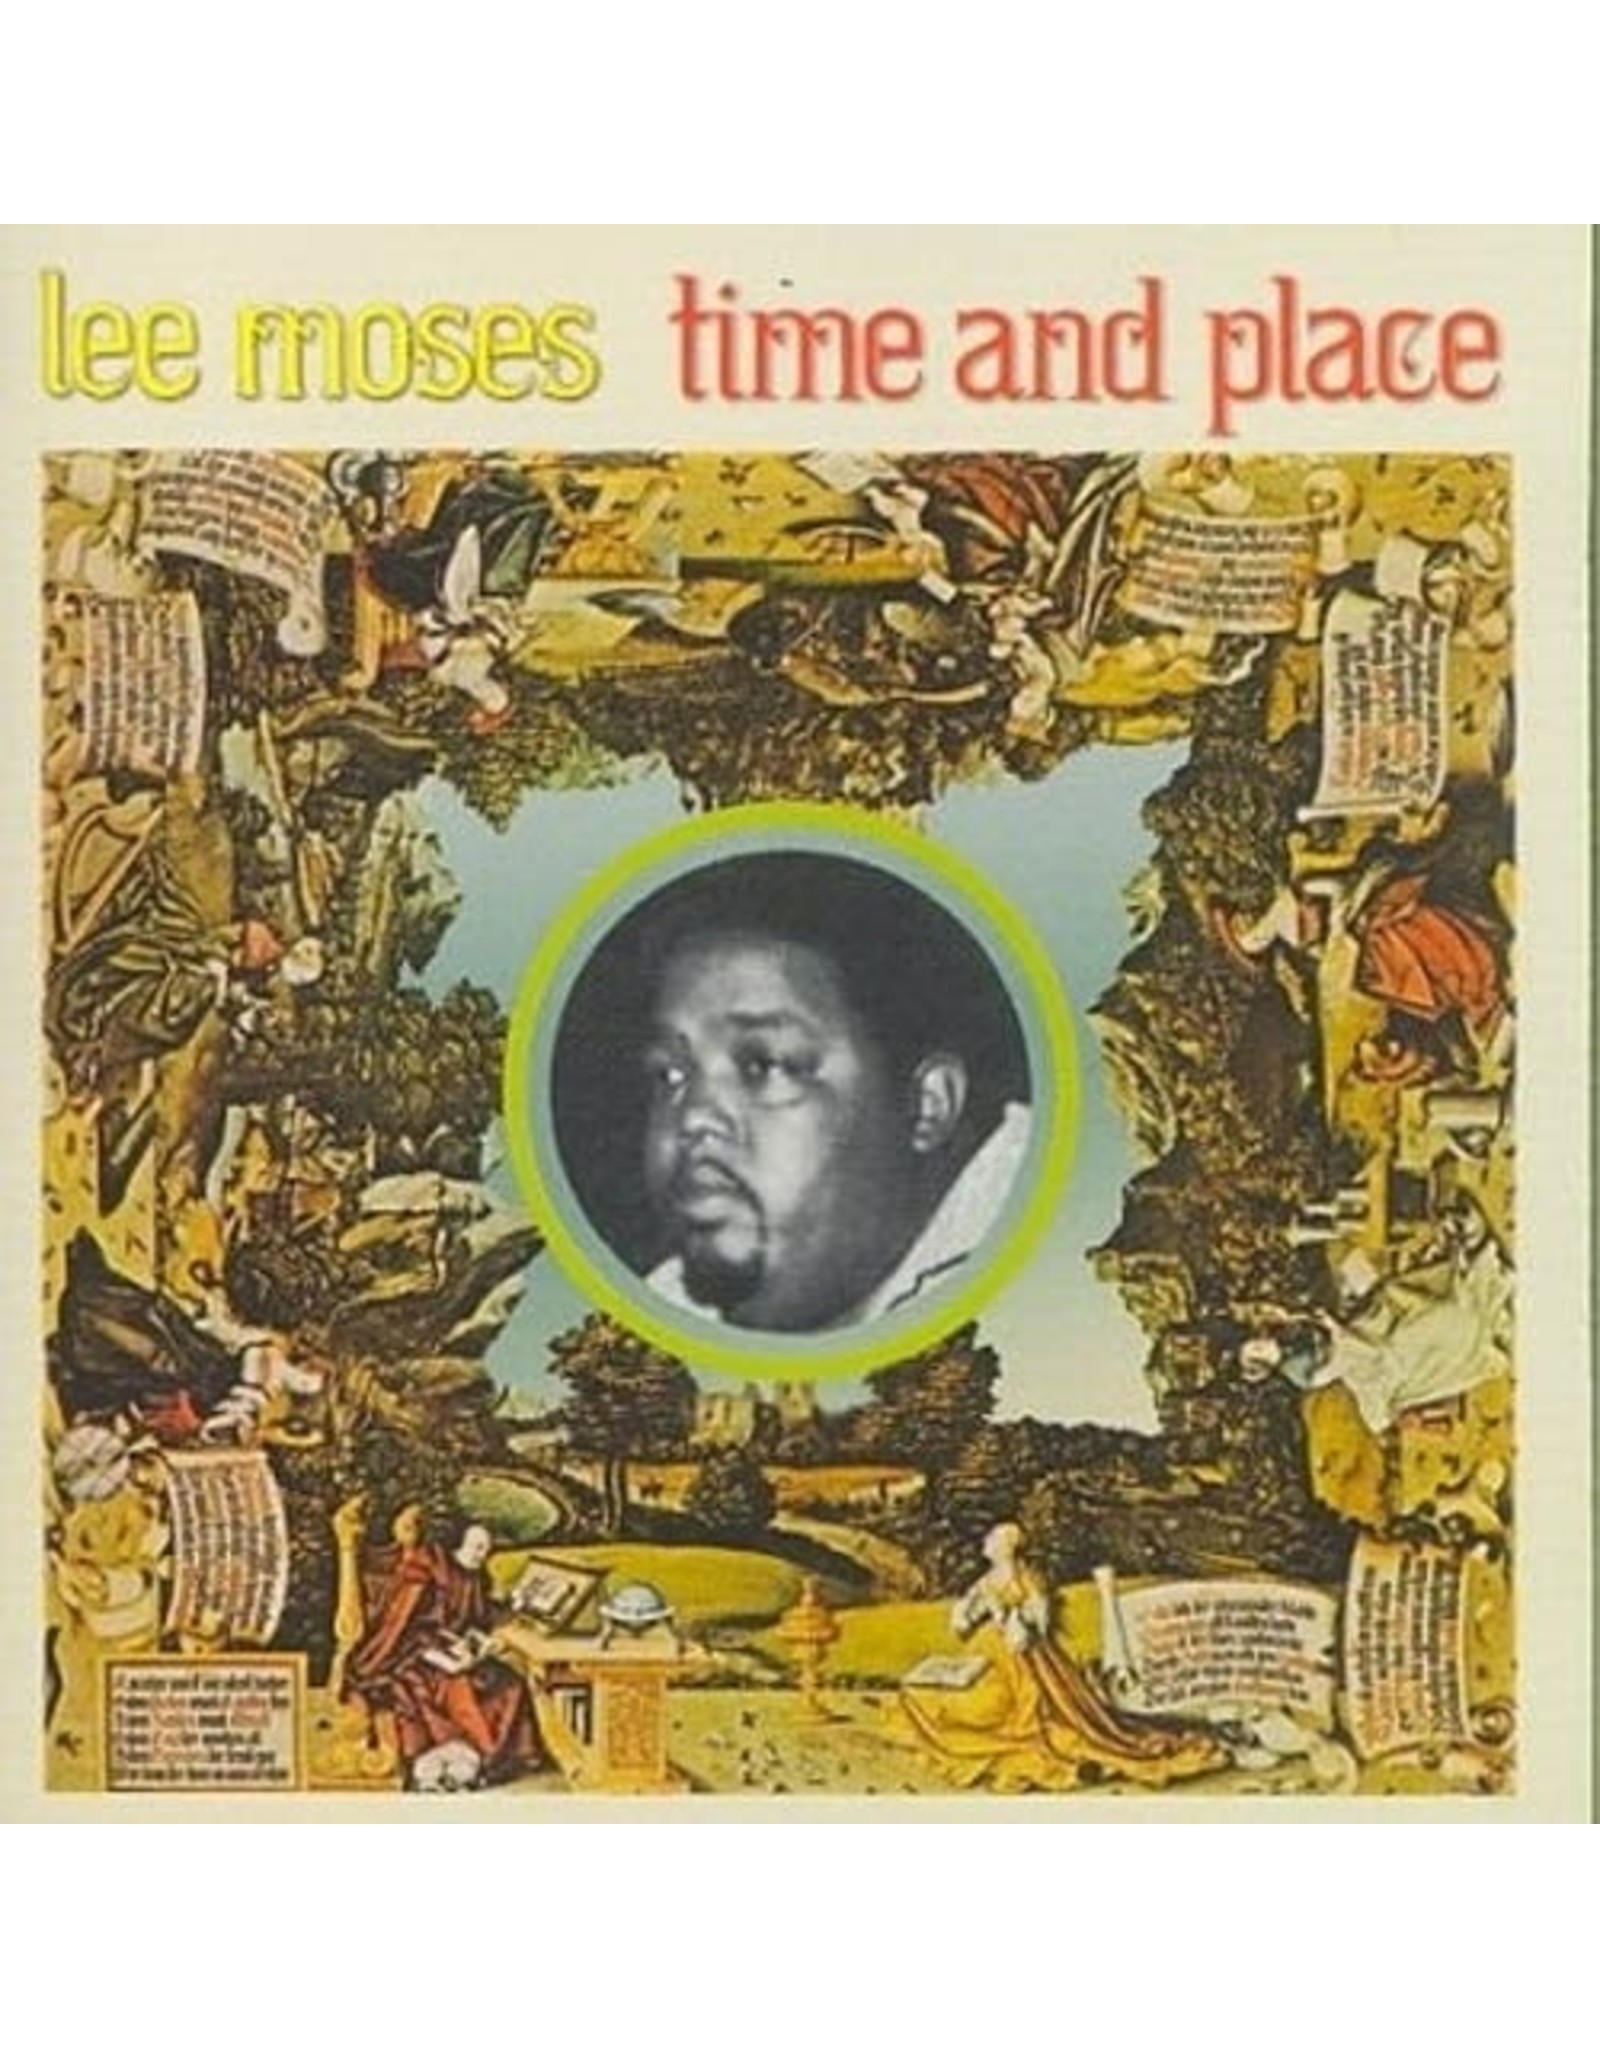 New Vinyl Lee Moses - Time and Place LP